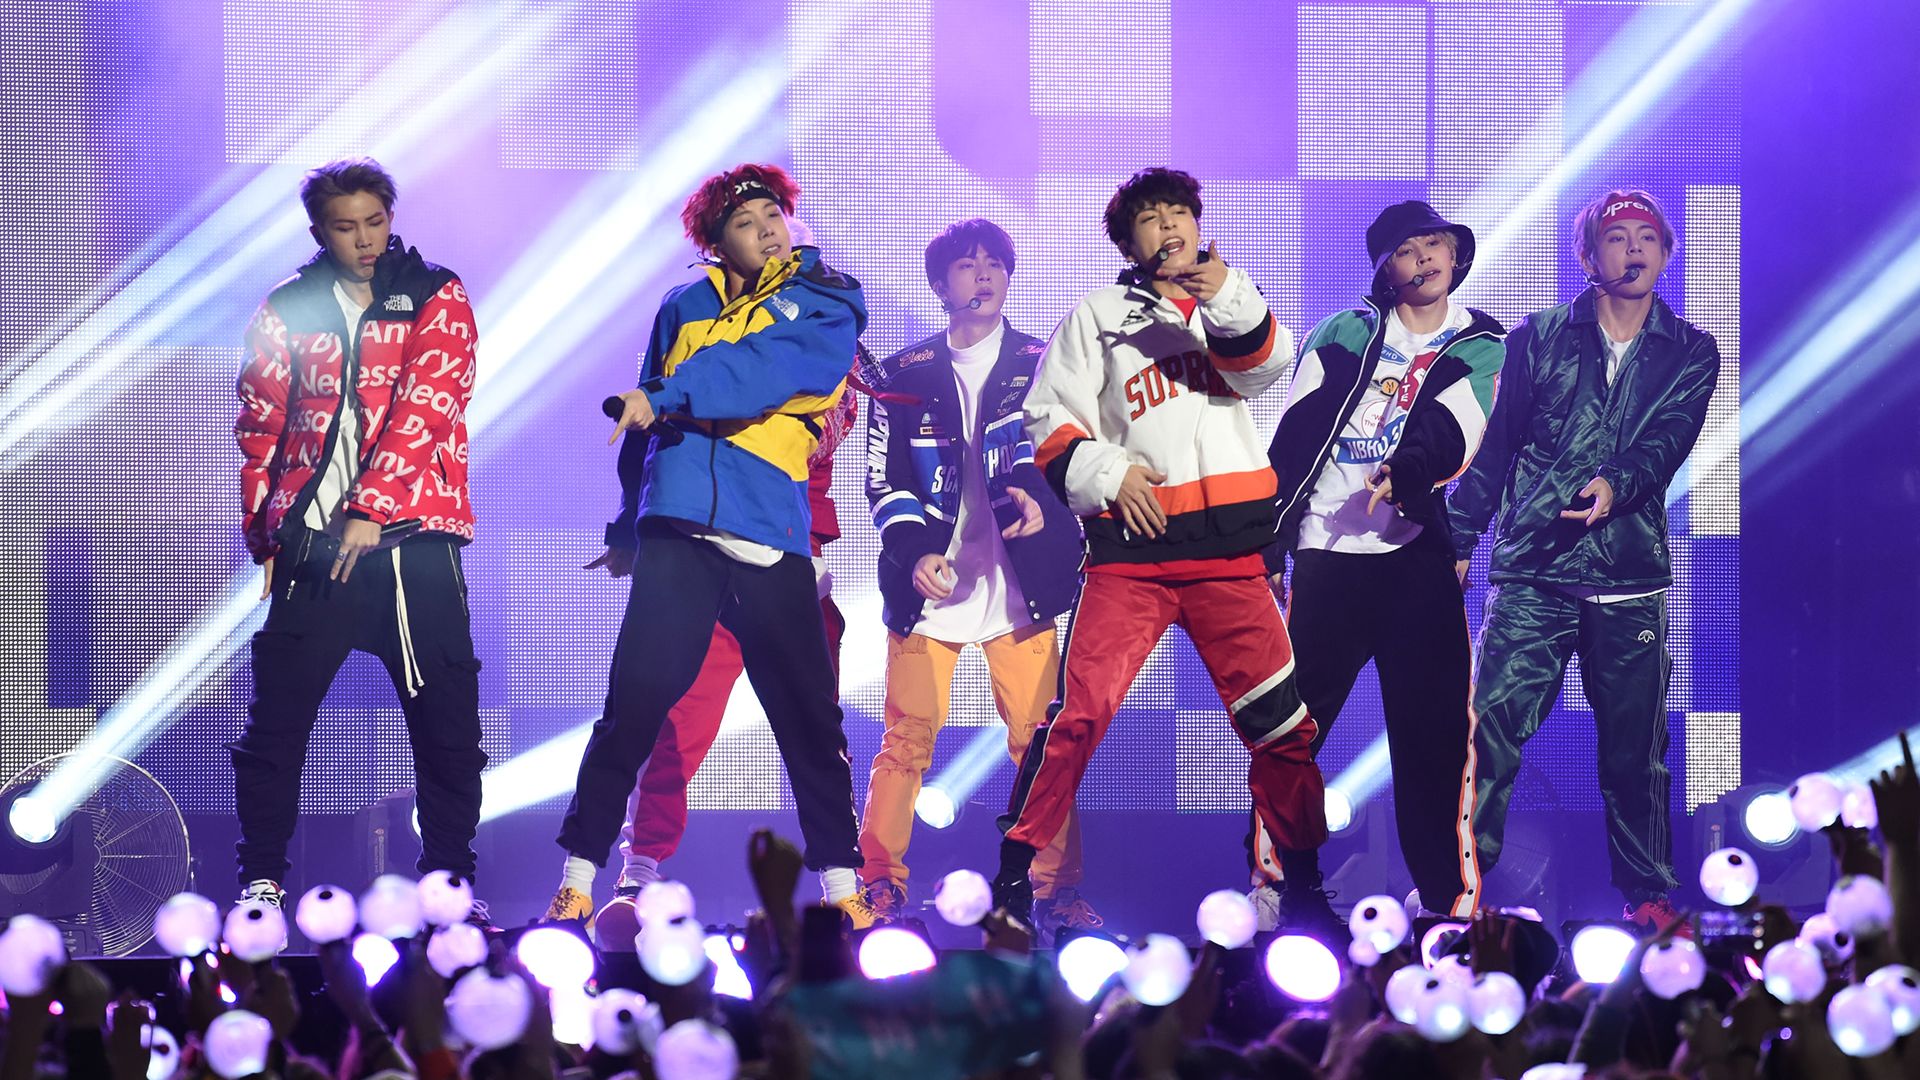 People are pretty unimpressed that a bunch of American guys formed a K-pop  group